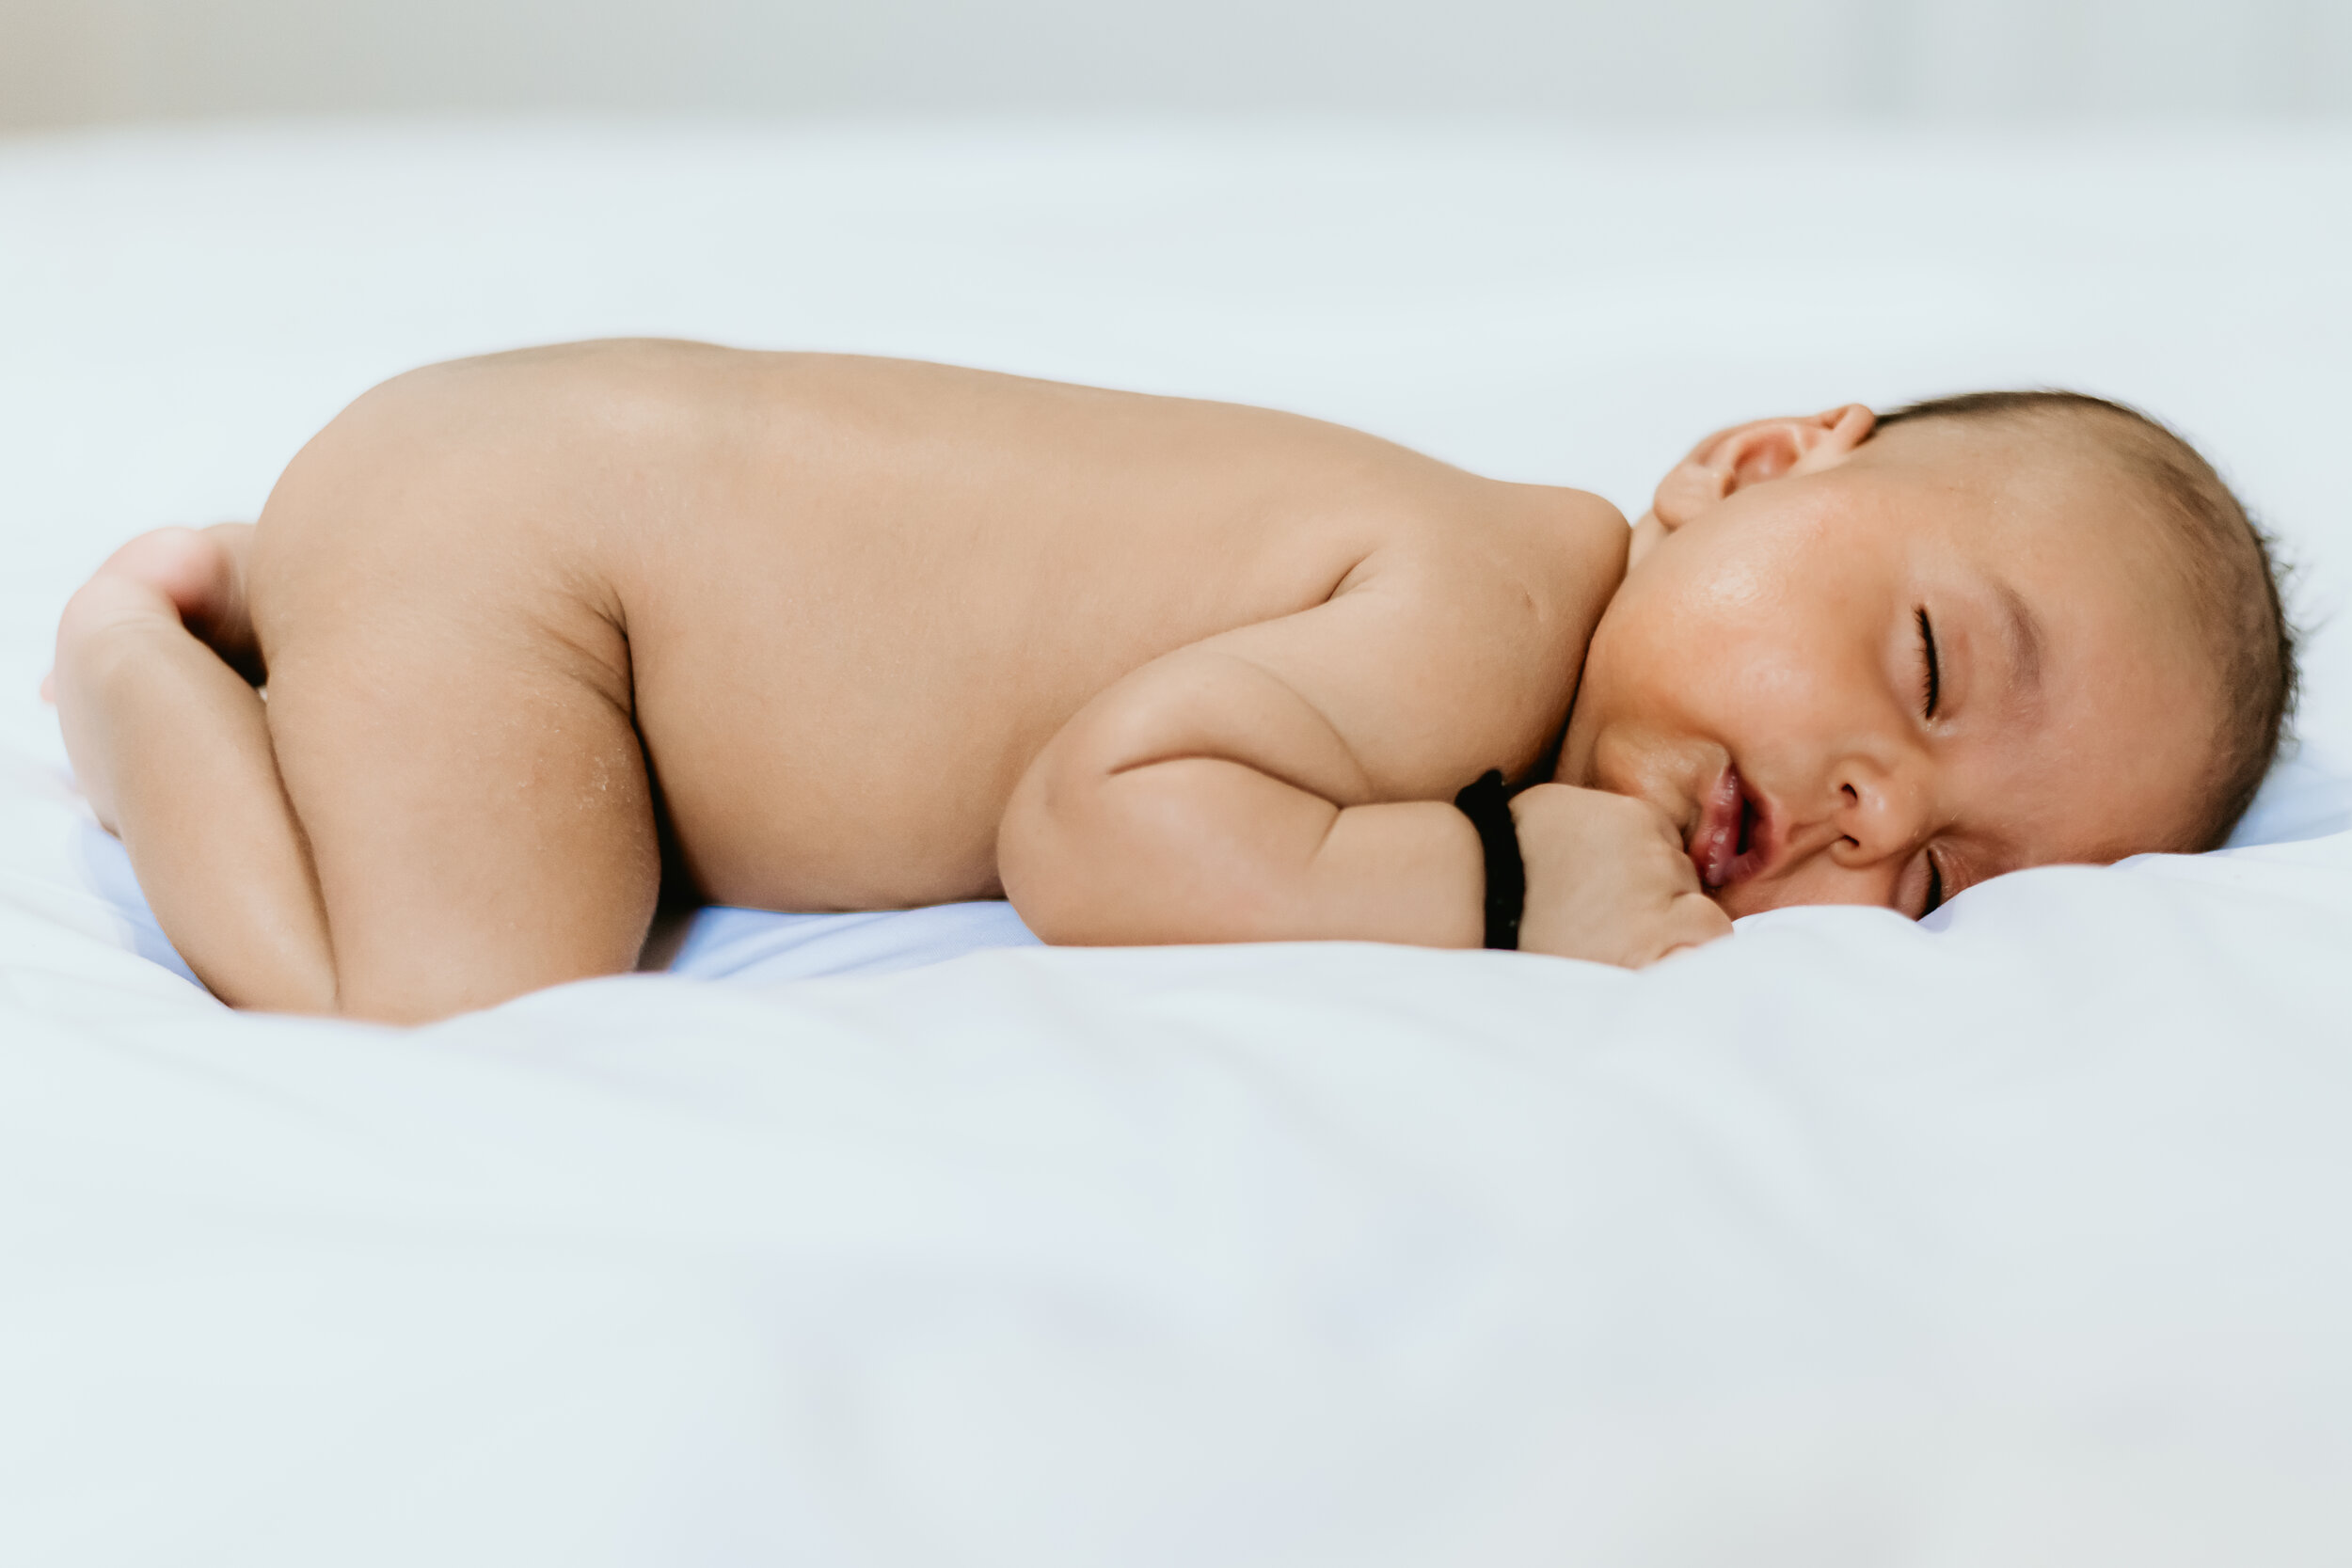  Connecticut Newborn Portrait - baby sleeping on the bed 